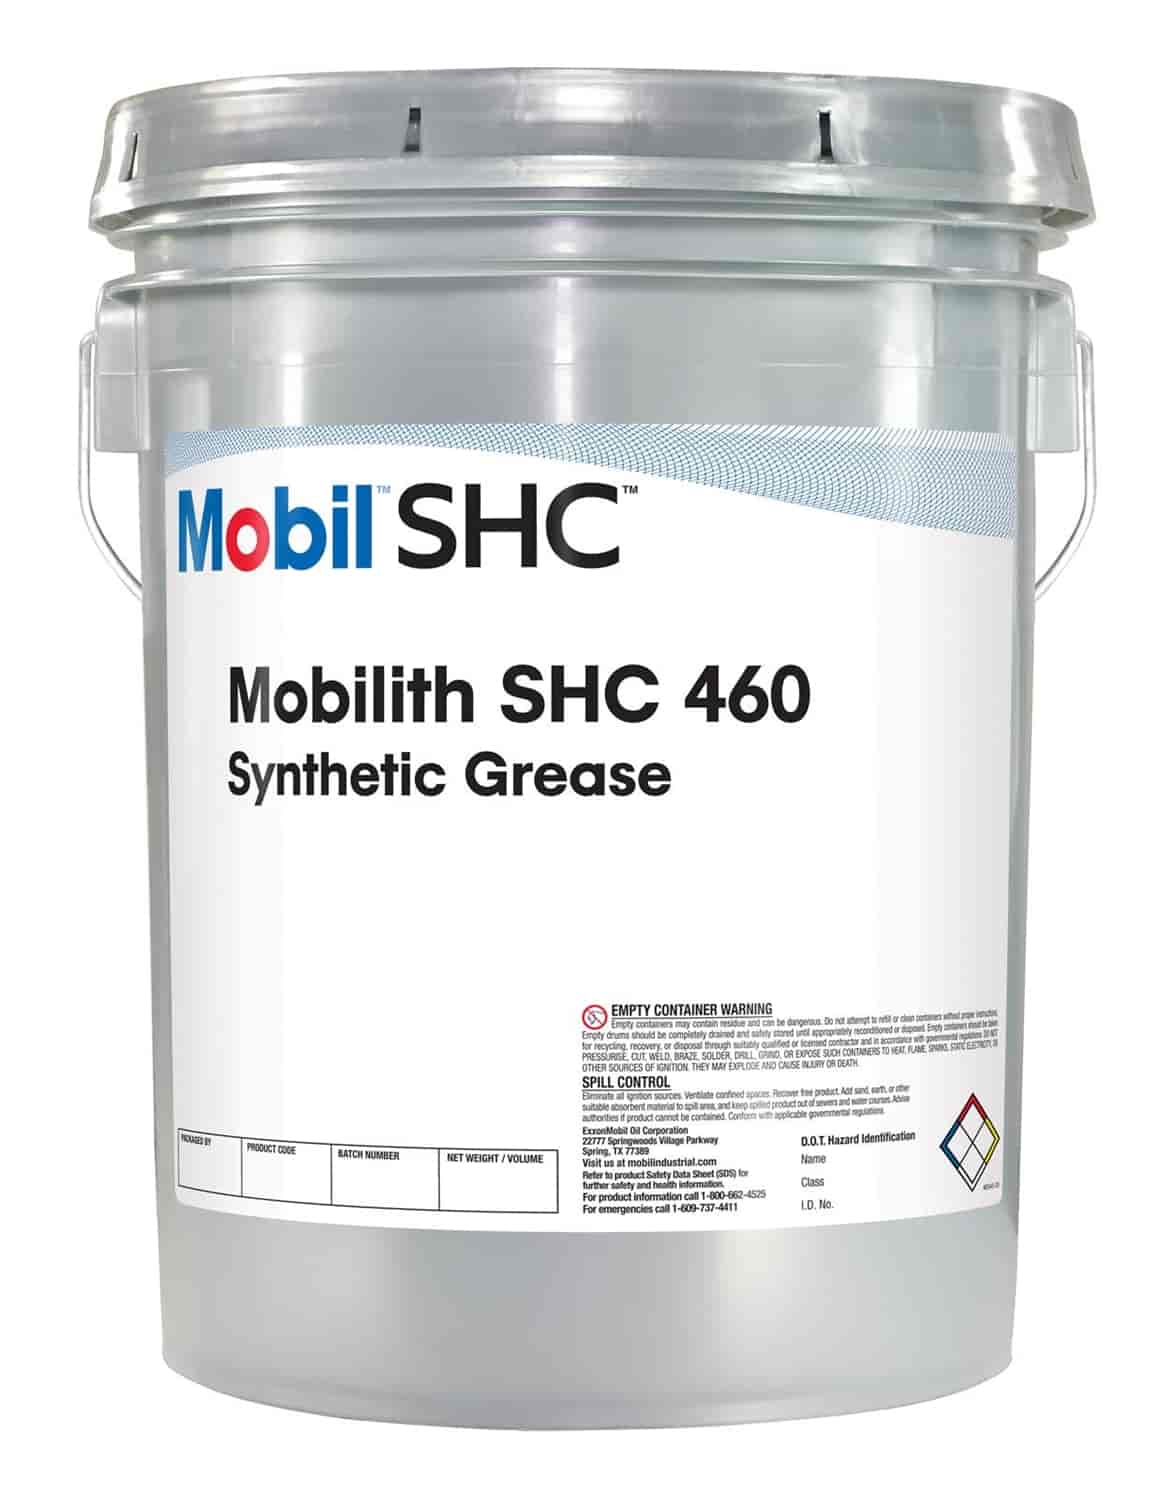 105798 Mobilith SHC 460 Synthetic Grease, 35 lbs.